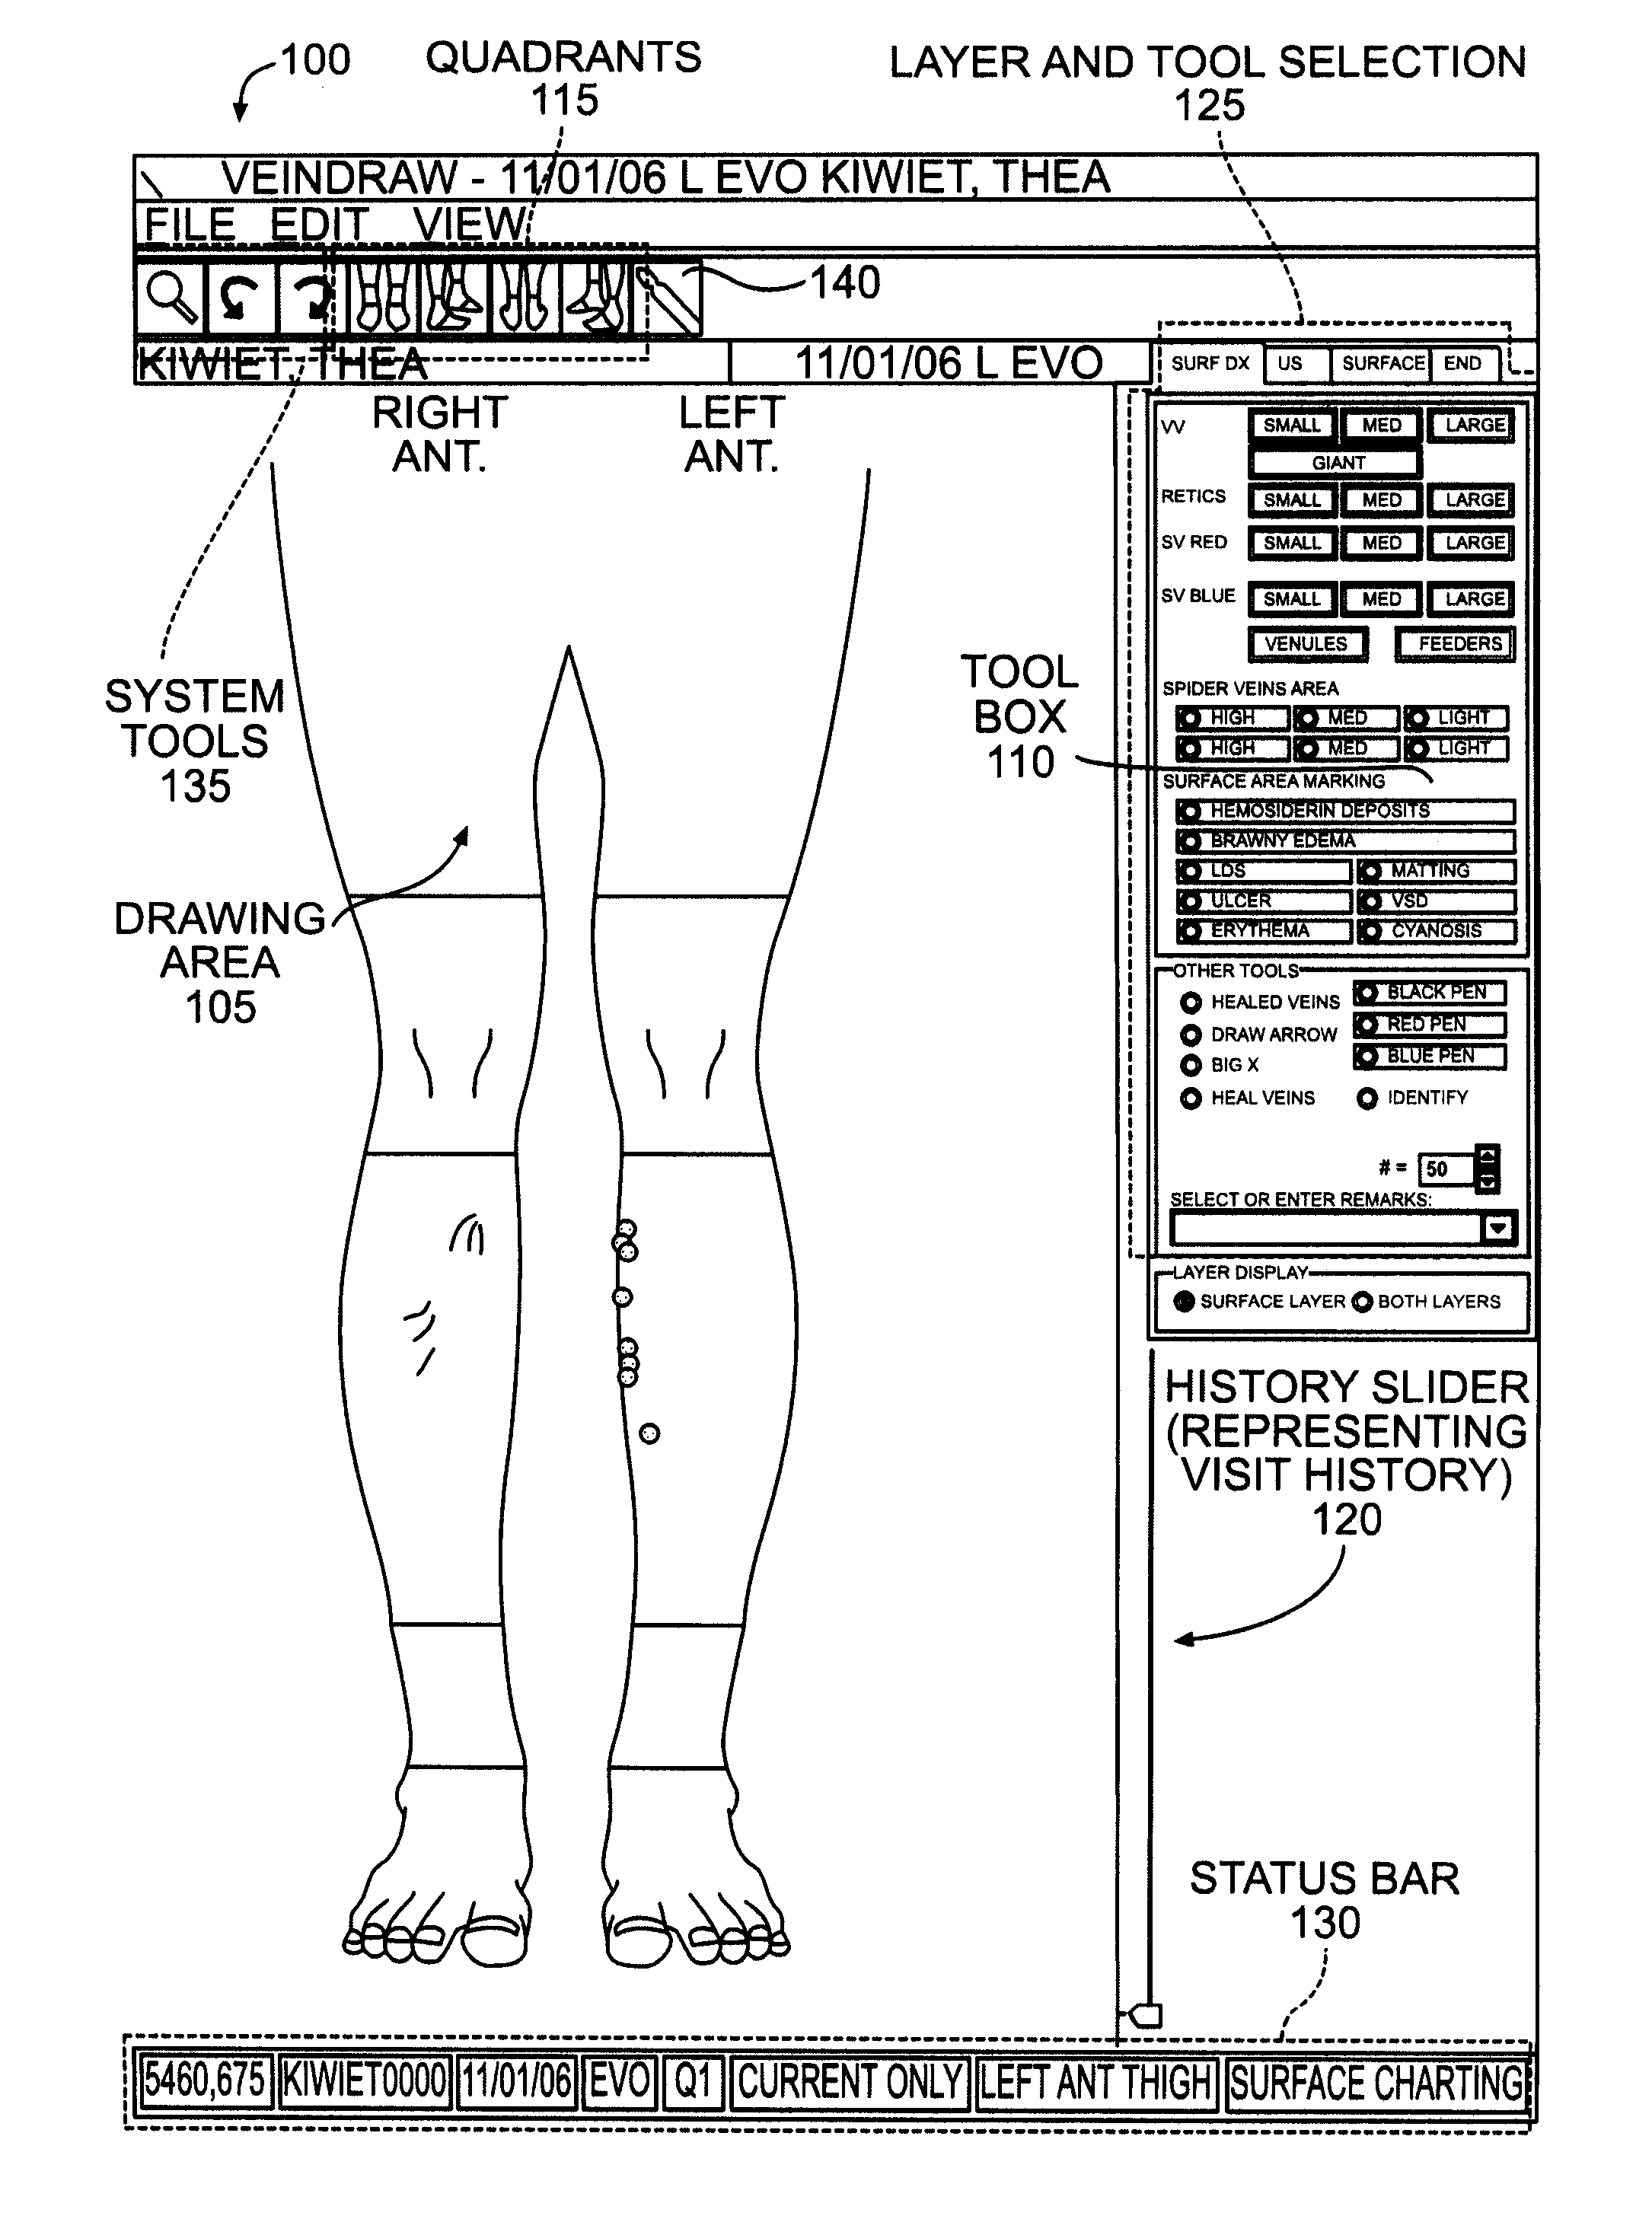 System and methods for capturing a medical drawing or sketch for generating progress notes, diagnosis and billing codes